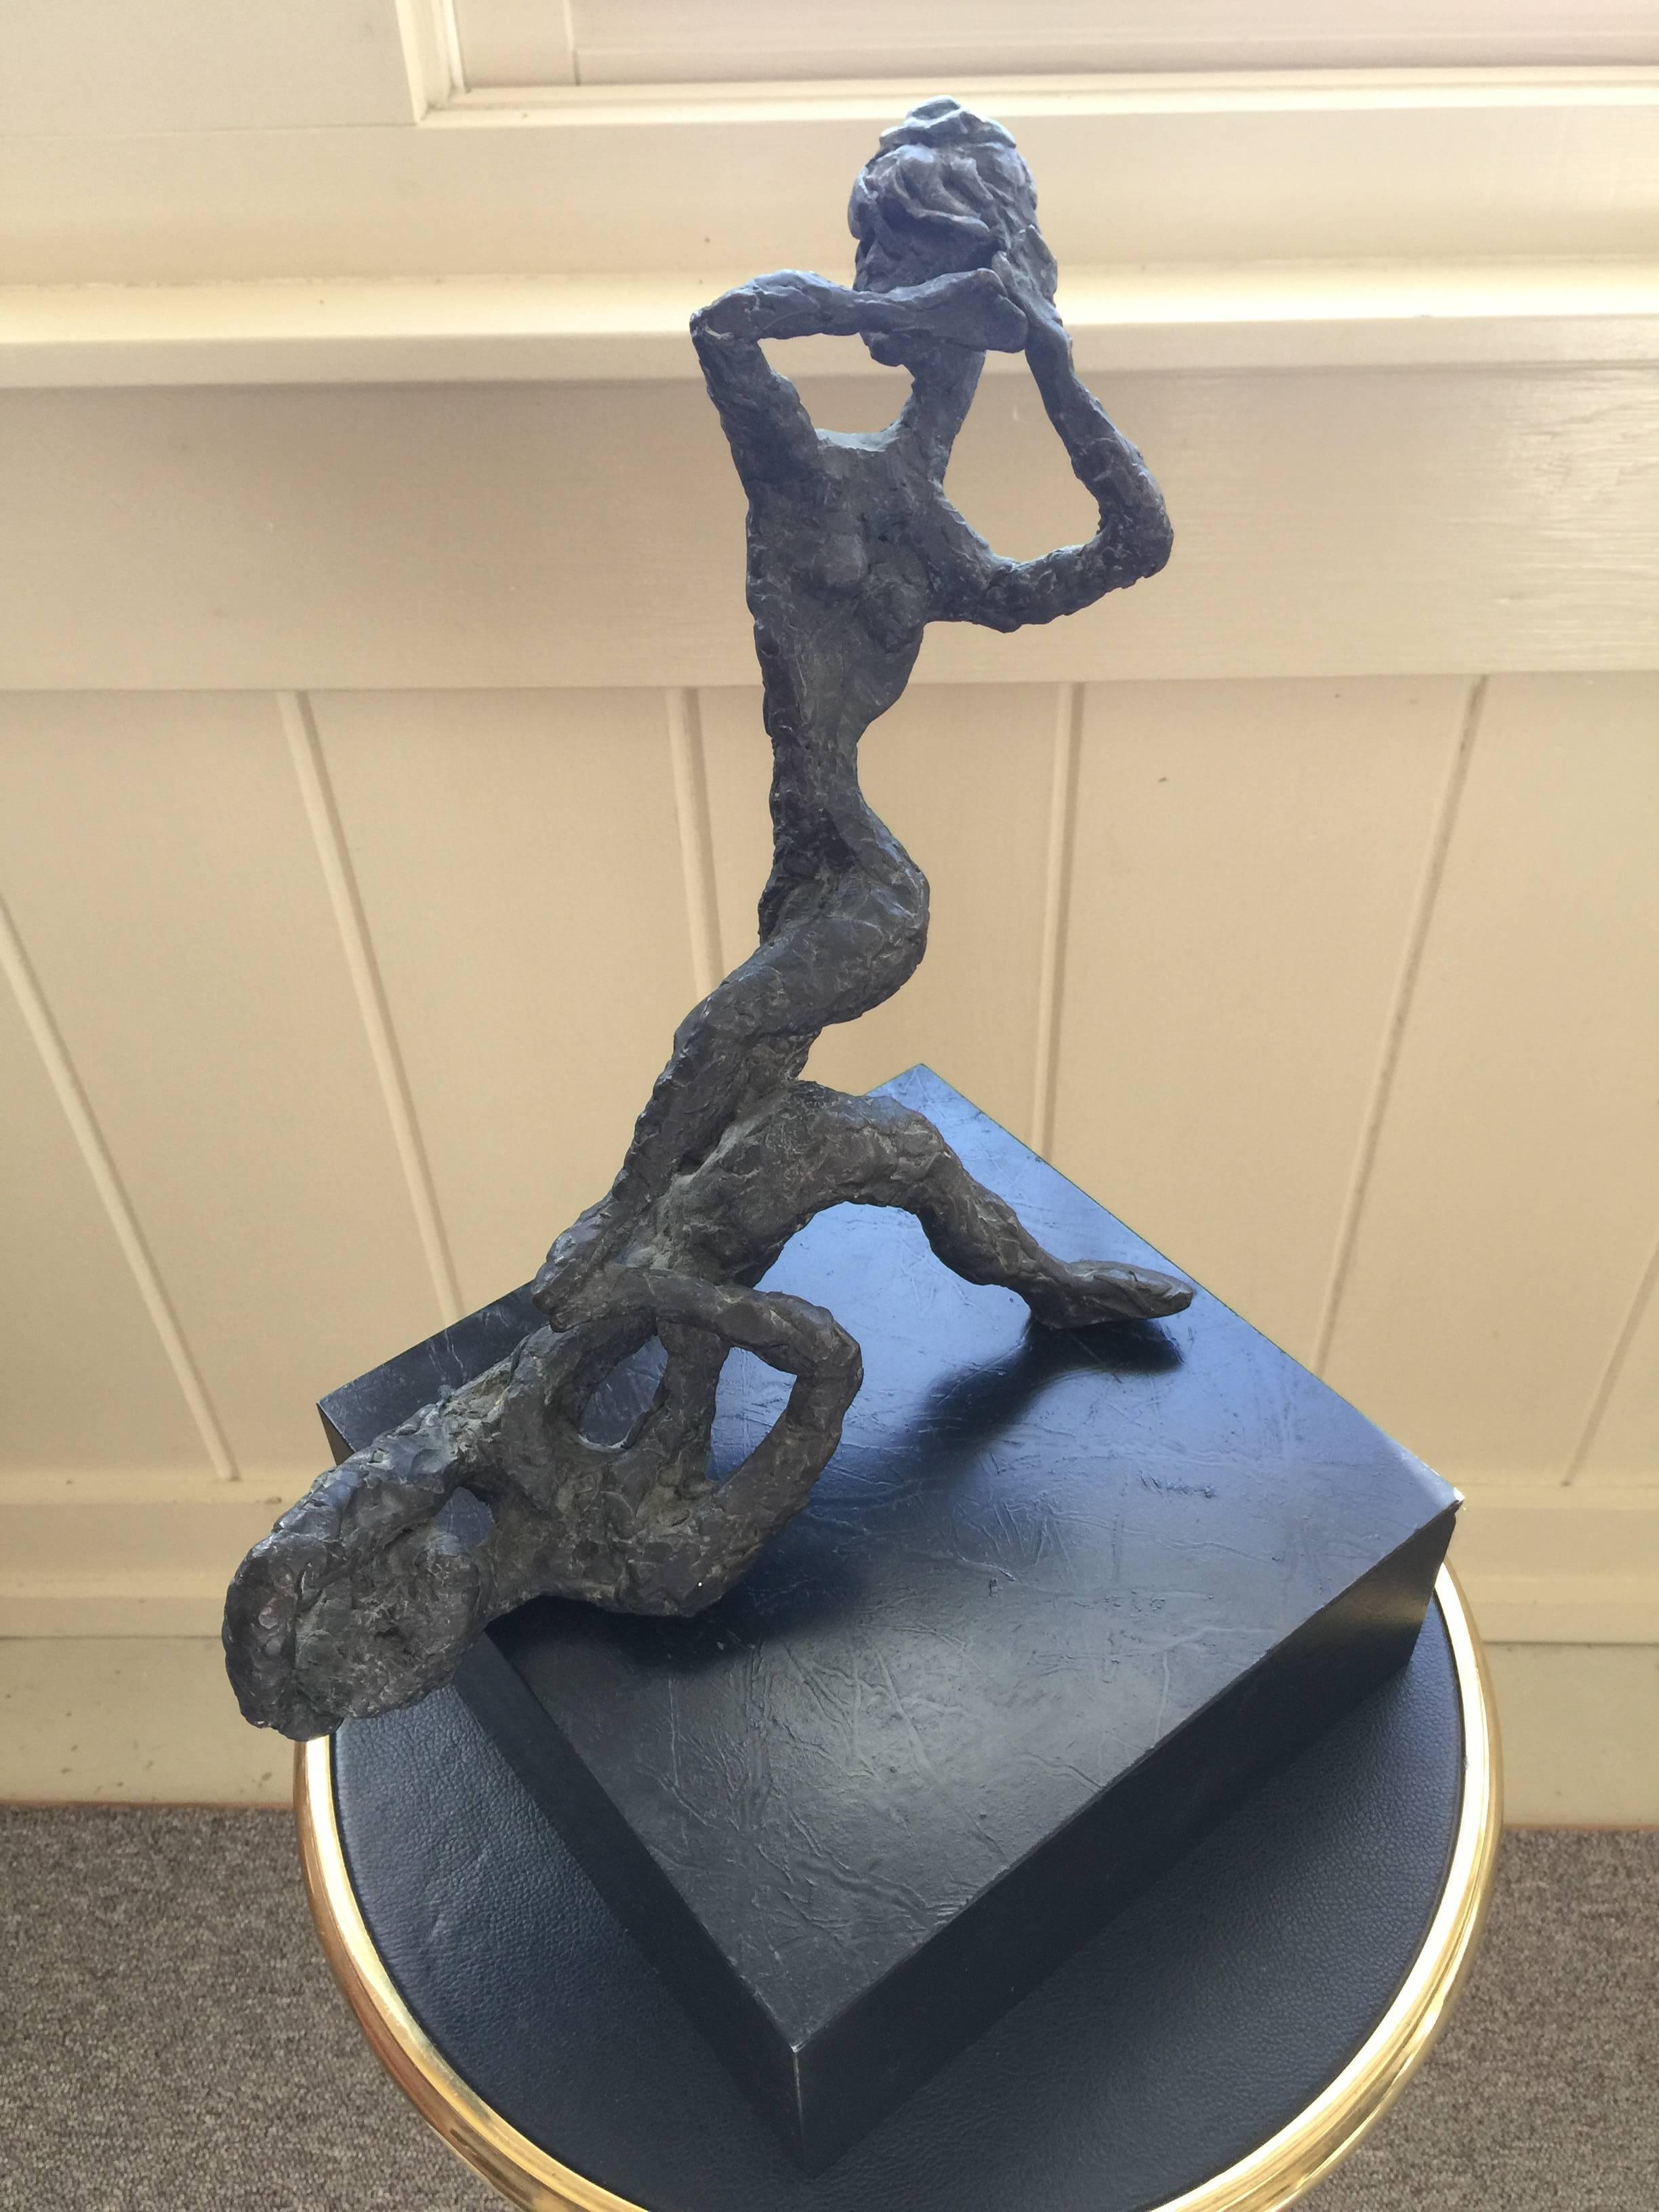 Abstract figurative sculpture purchased from North Carolina artist's estate. No signature.